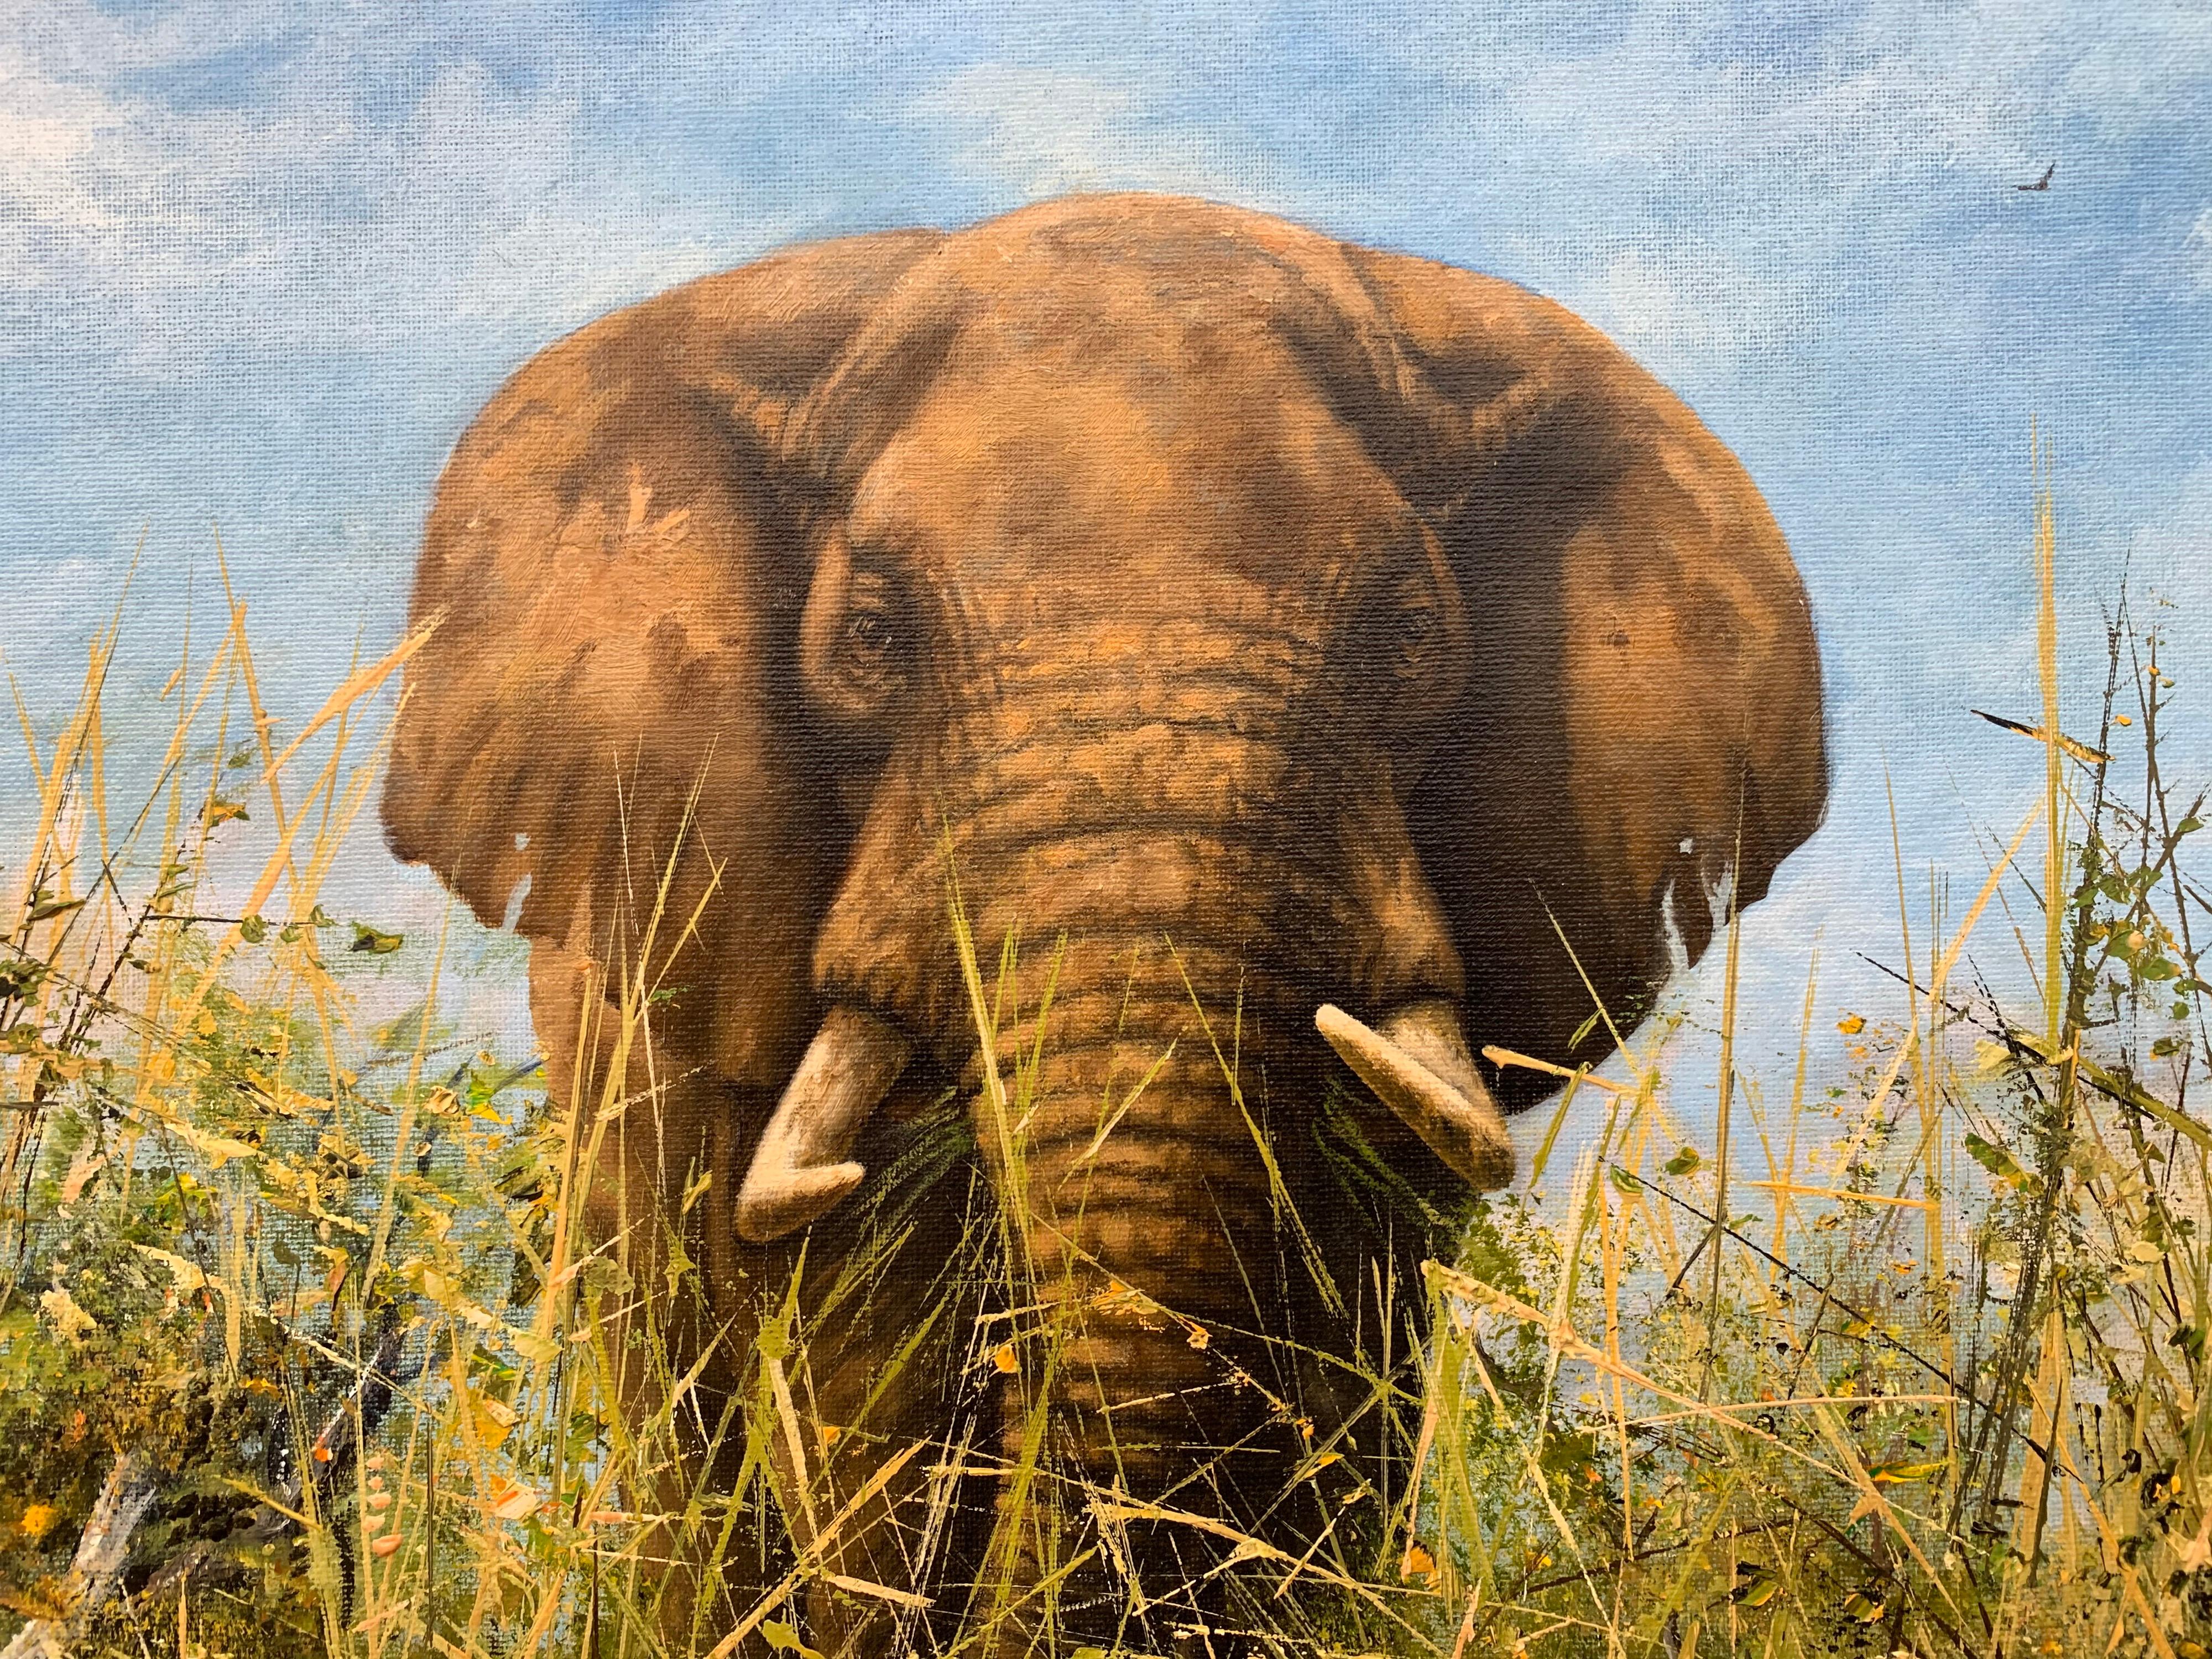 Original Oil Painting of Elephant in the Wild by British Contemporary Artist - Brown Figurative Painting by Mark Whittaker